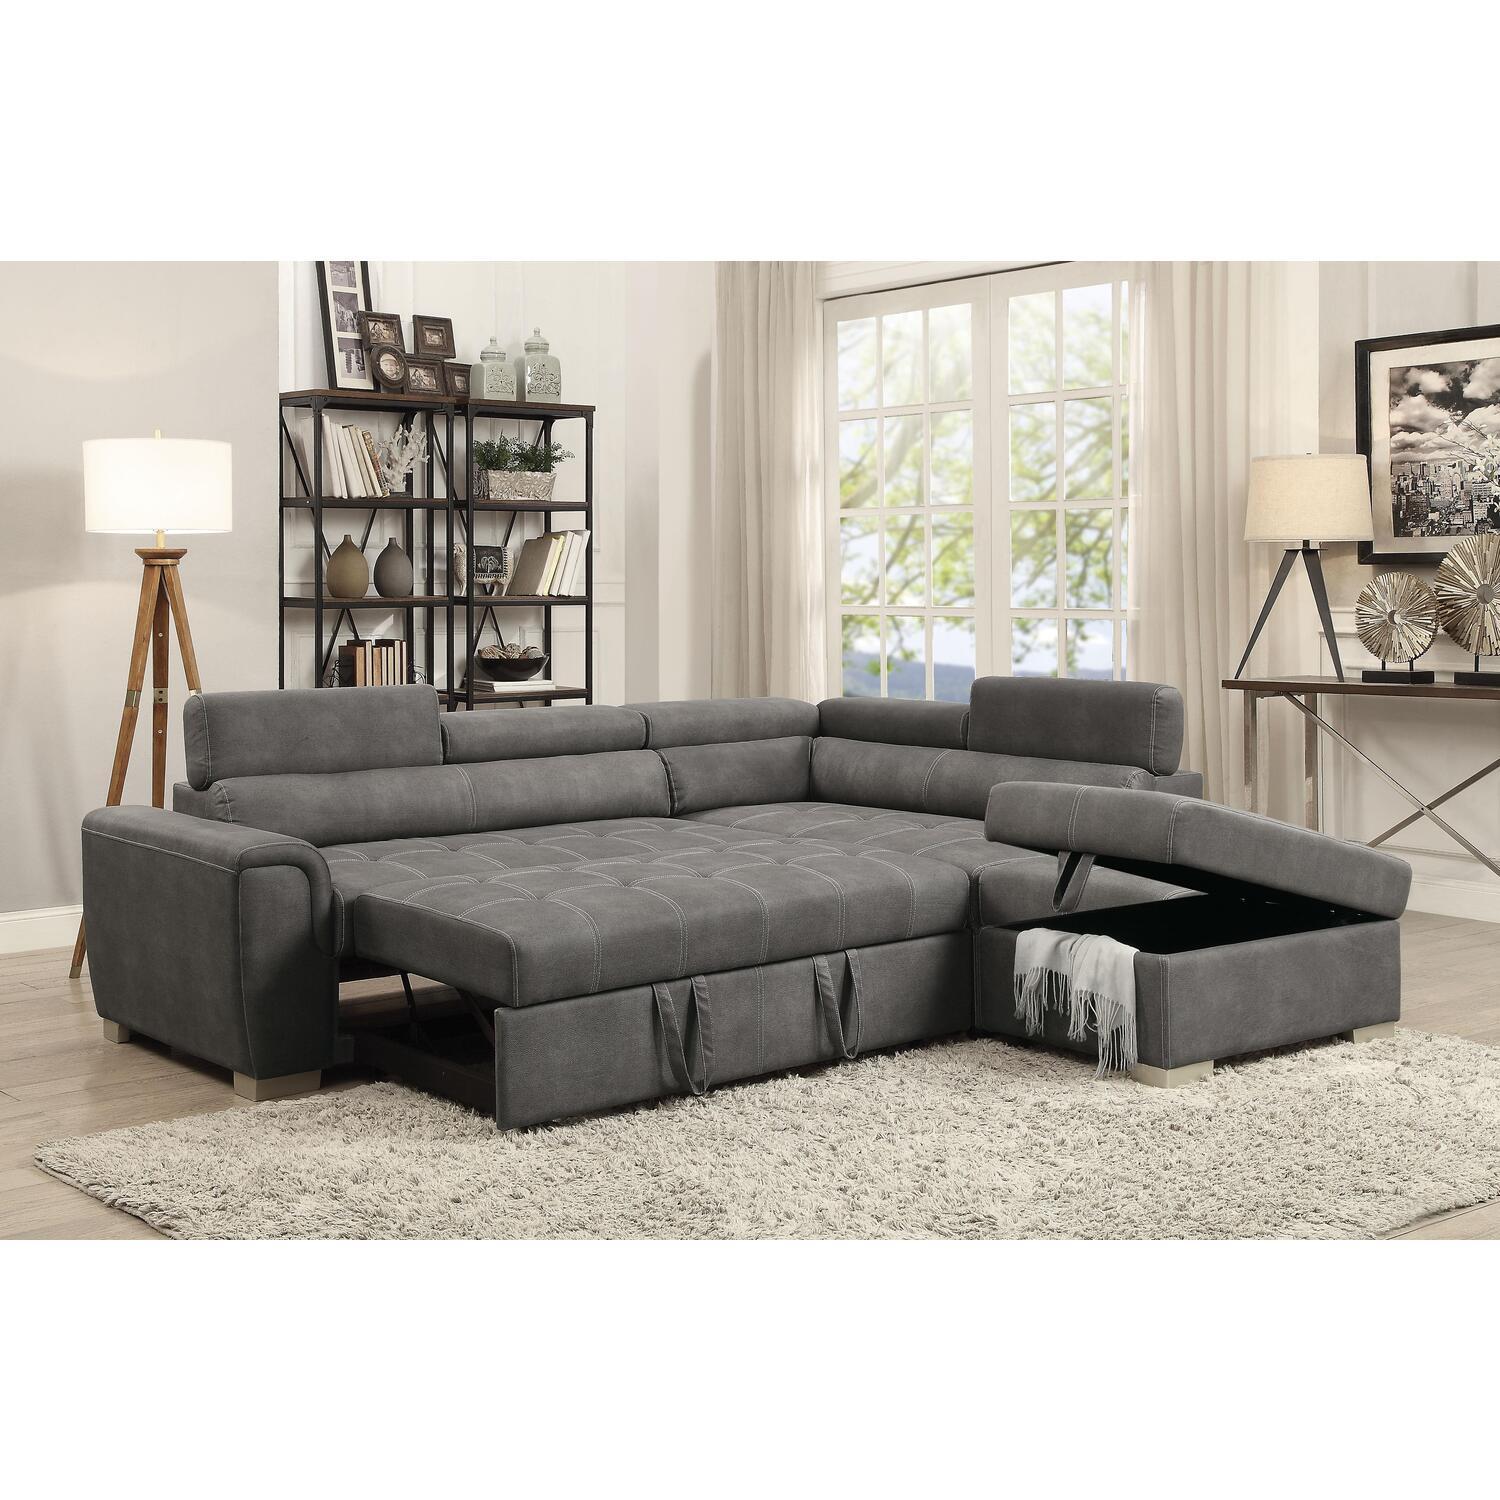 ACME Thelma Sectional Sleeper Sofa and Ottoman in Gray Polished Microfiber - image 1 of 5